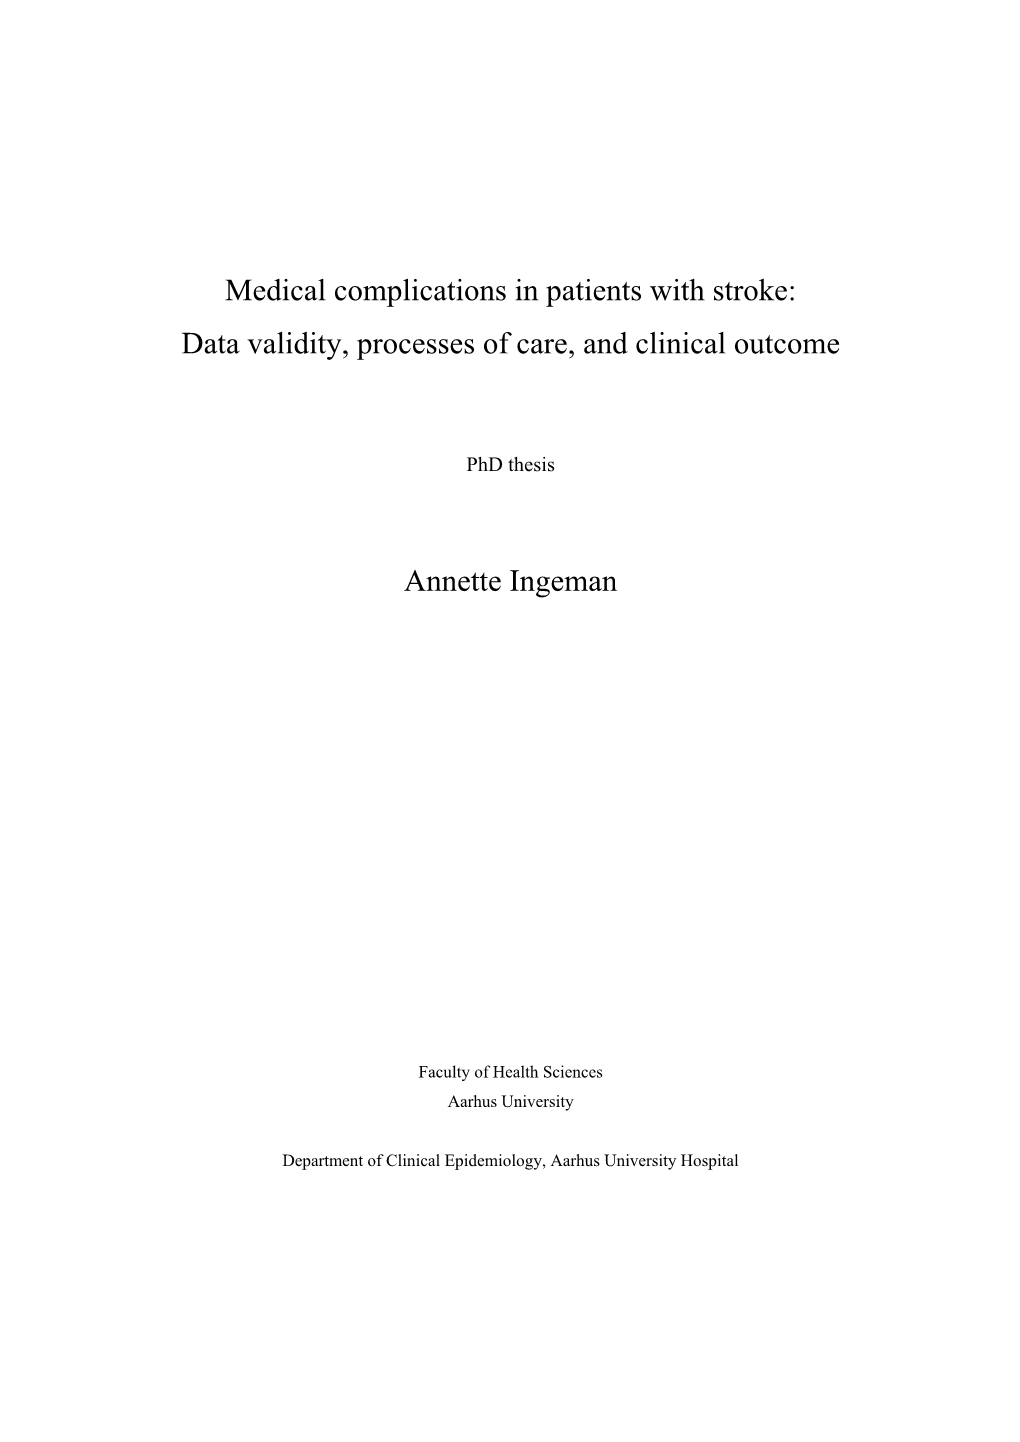 Medical Complications in Patients with Stroke: Data Validity, Processes of Care, and Clinical Outcome Annette Ingeman